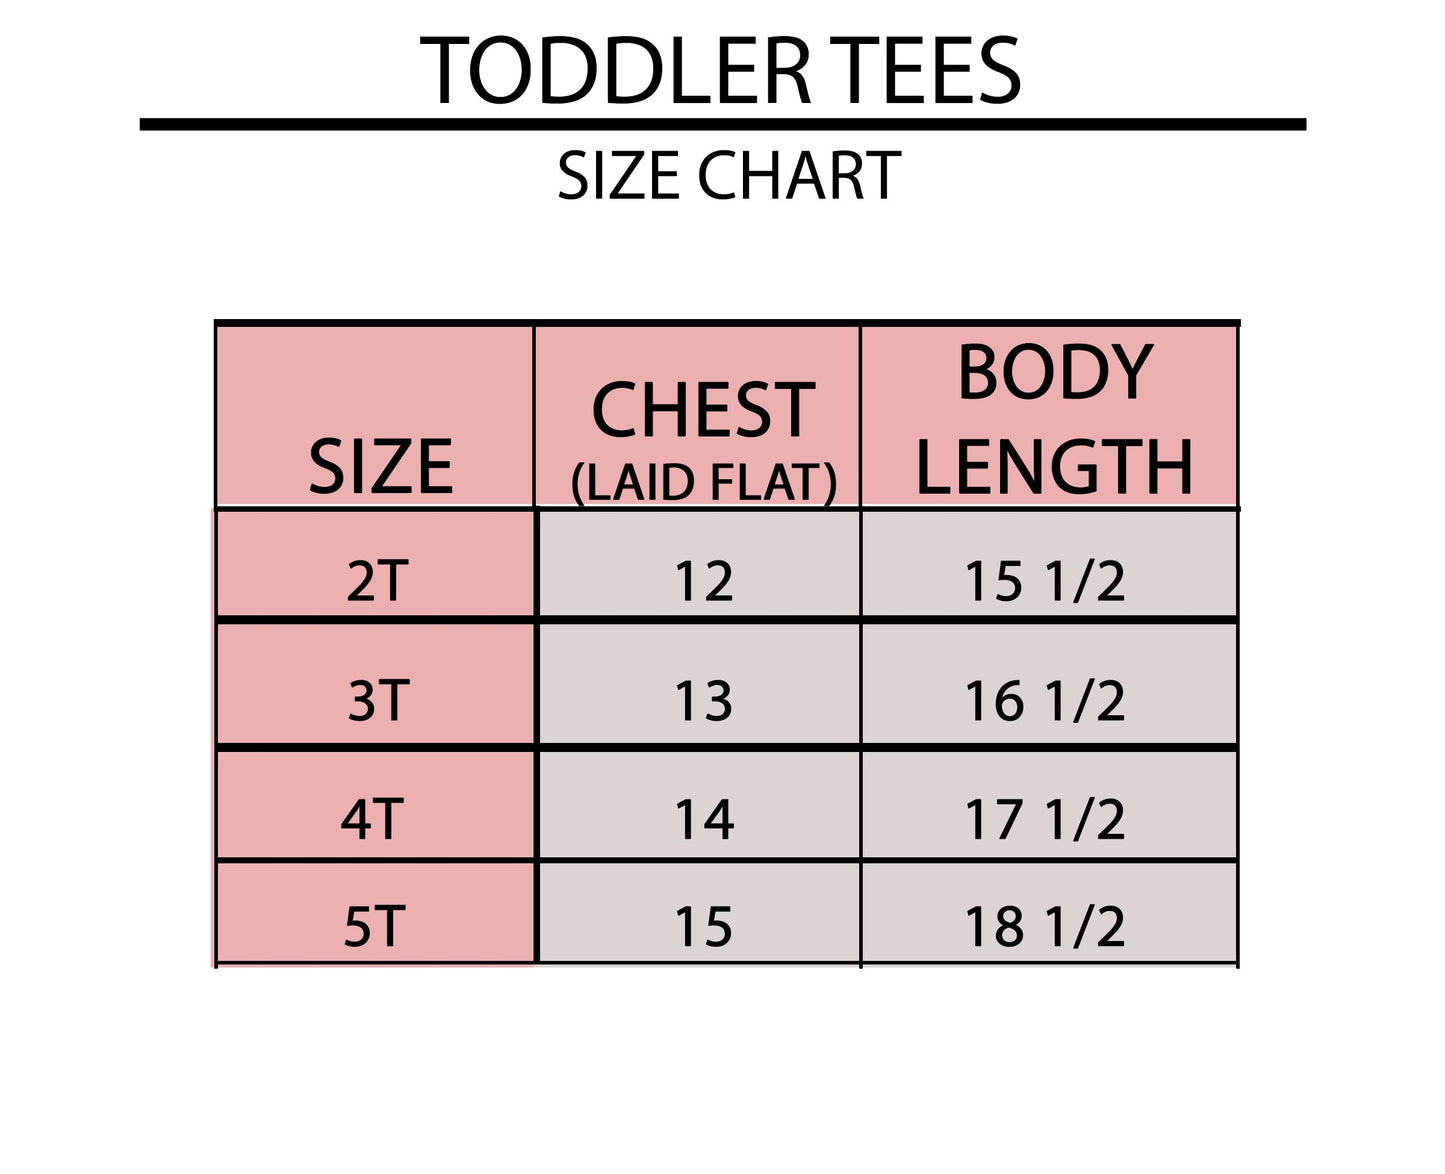 Keep Smiling Happy Face | Toddler Short Sleeve Crew Neck